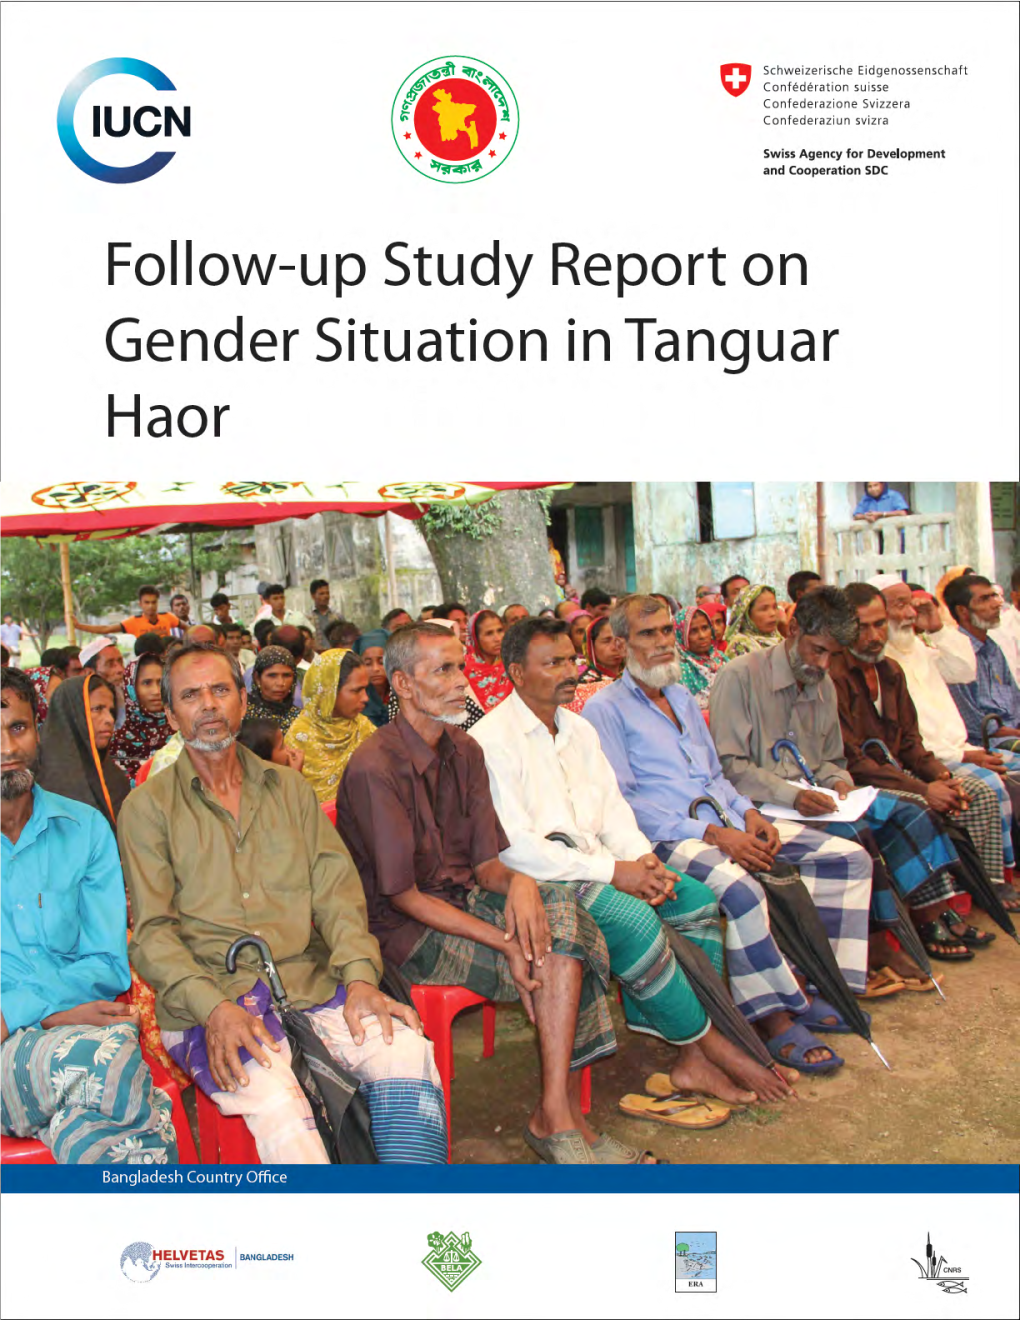 Follow-Up Study Report on Gender Situation in Tanguar Haor